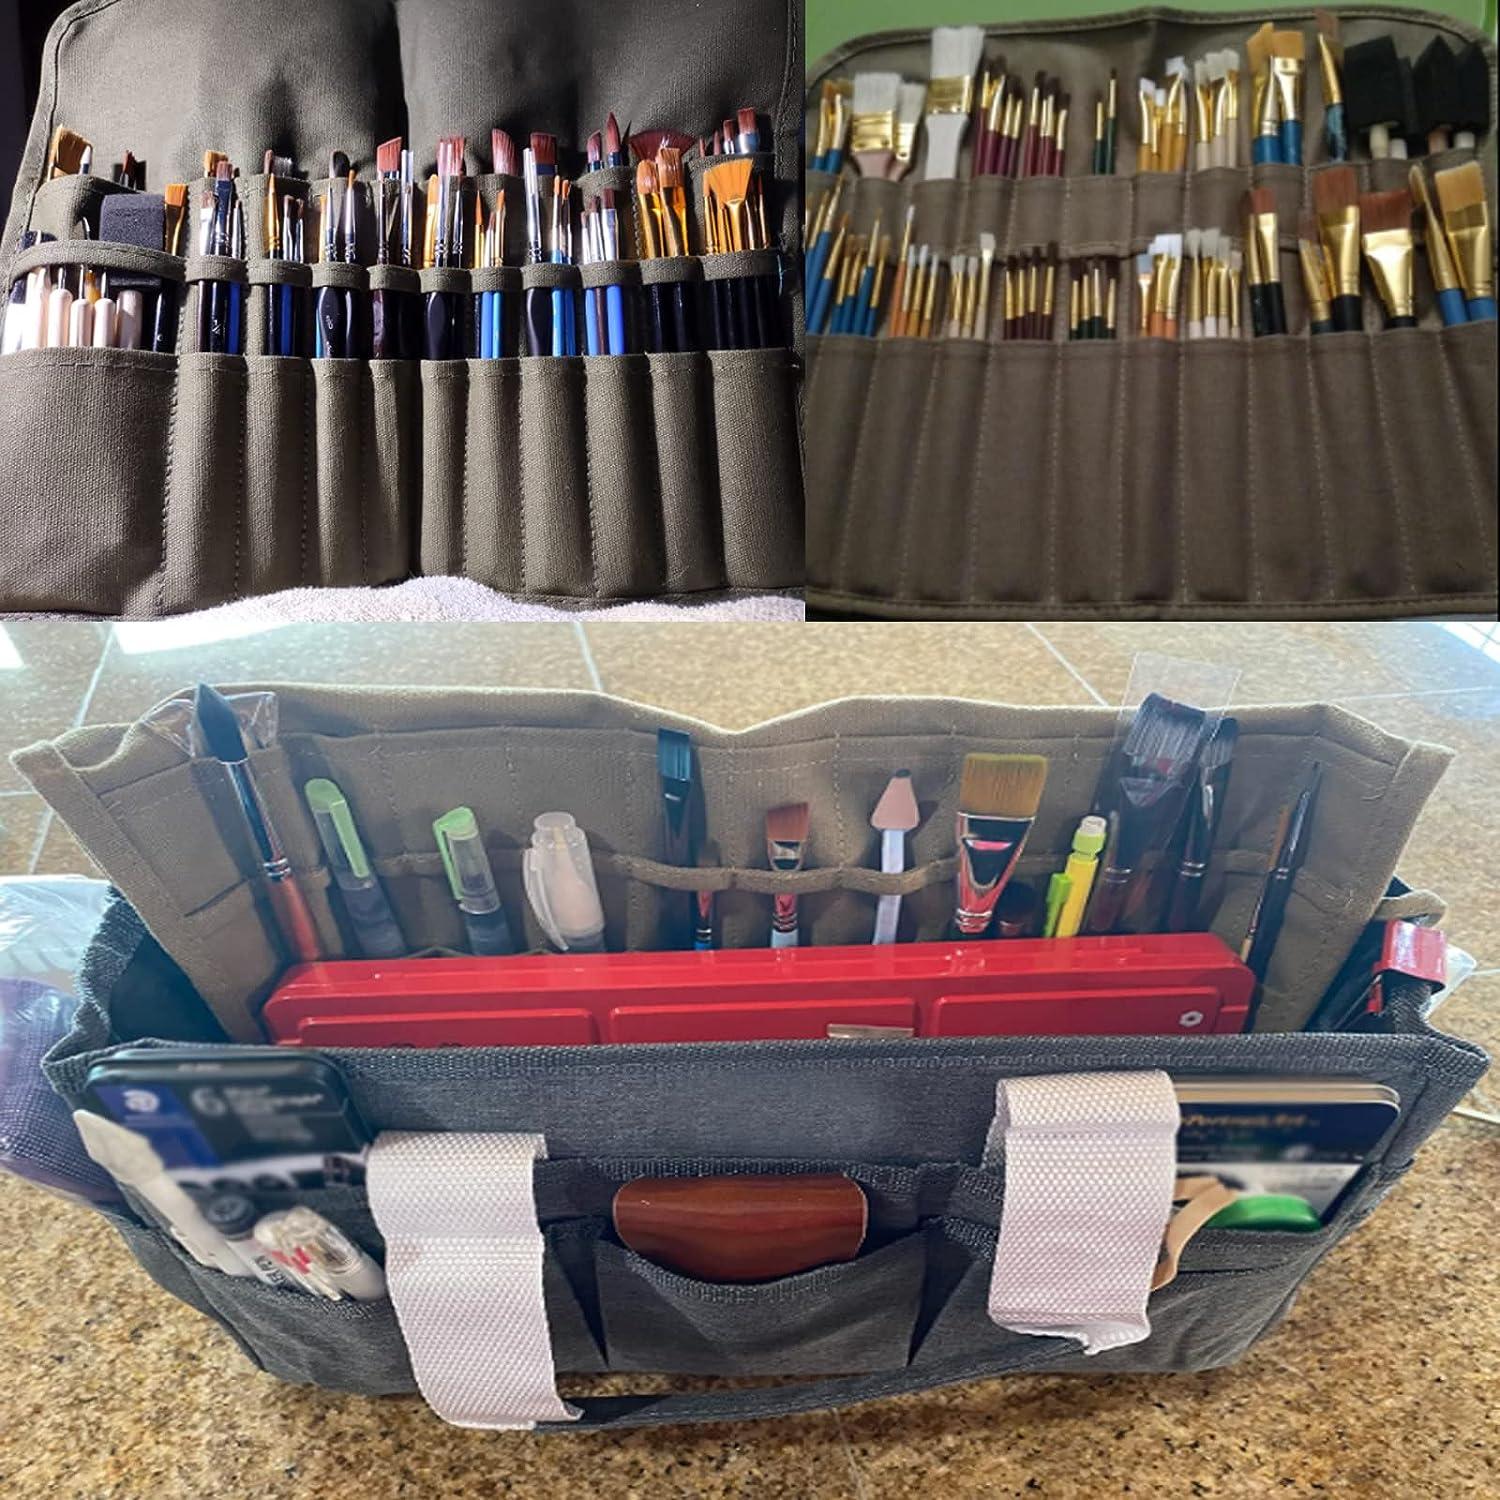 KAZETEC Brush Pouch Roll Up Canvas Paint Brush Holder 22 Slot Pocket Carry  Bag Protect Artist Acrylic Oil Watercolor Brushes paint brush holder  Classroom Pencil Storage Outdoor Cutlery Storage